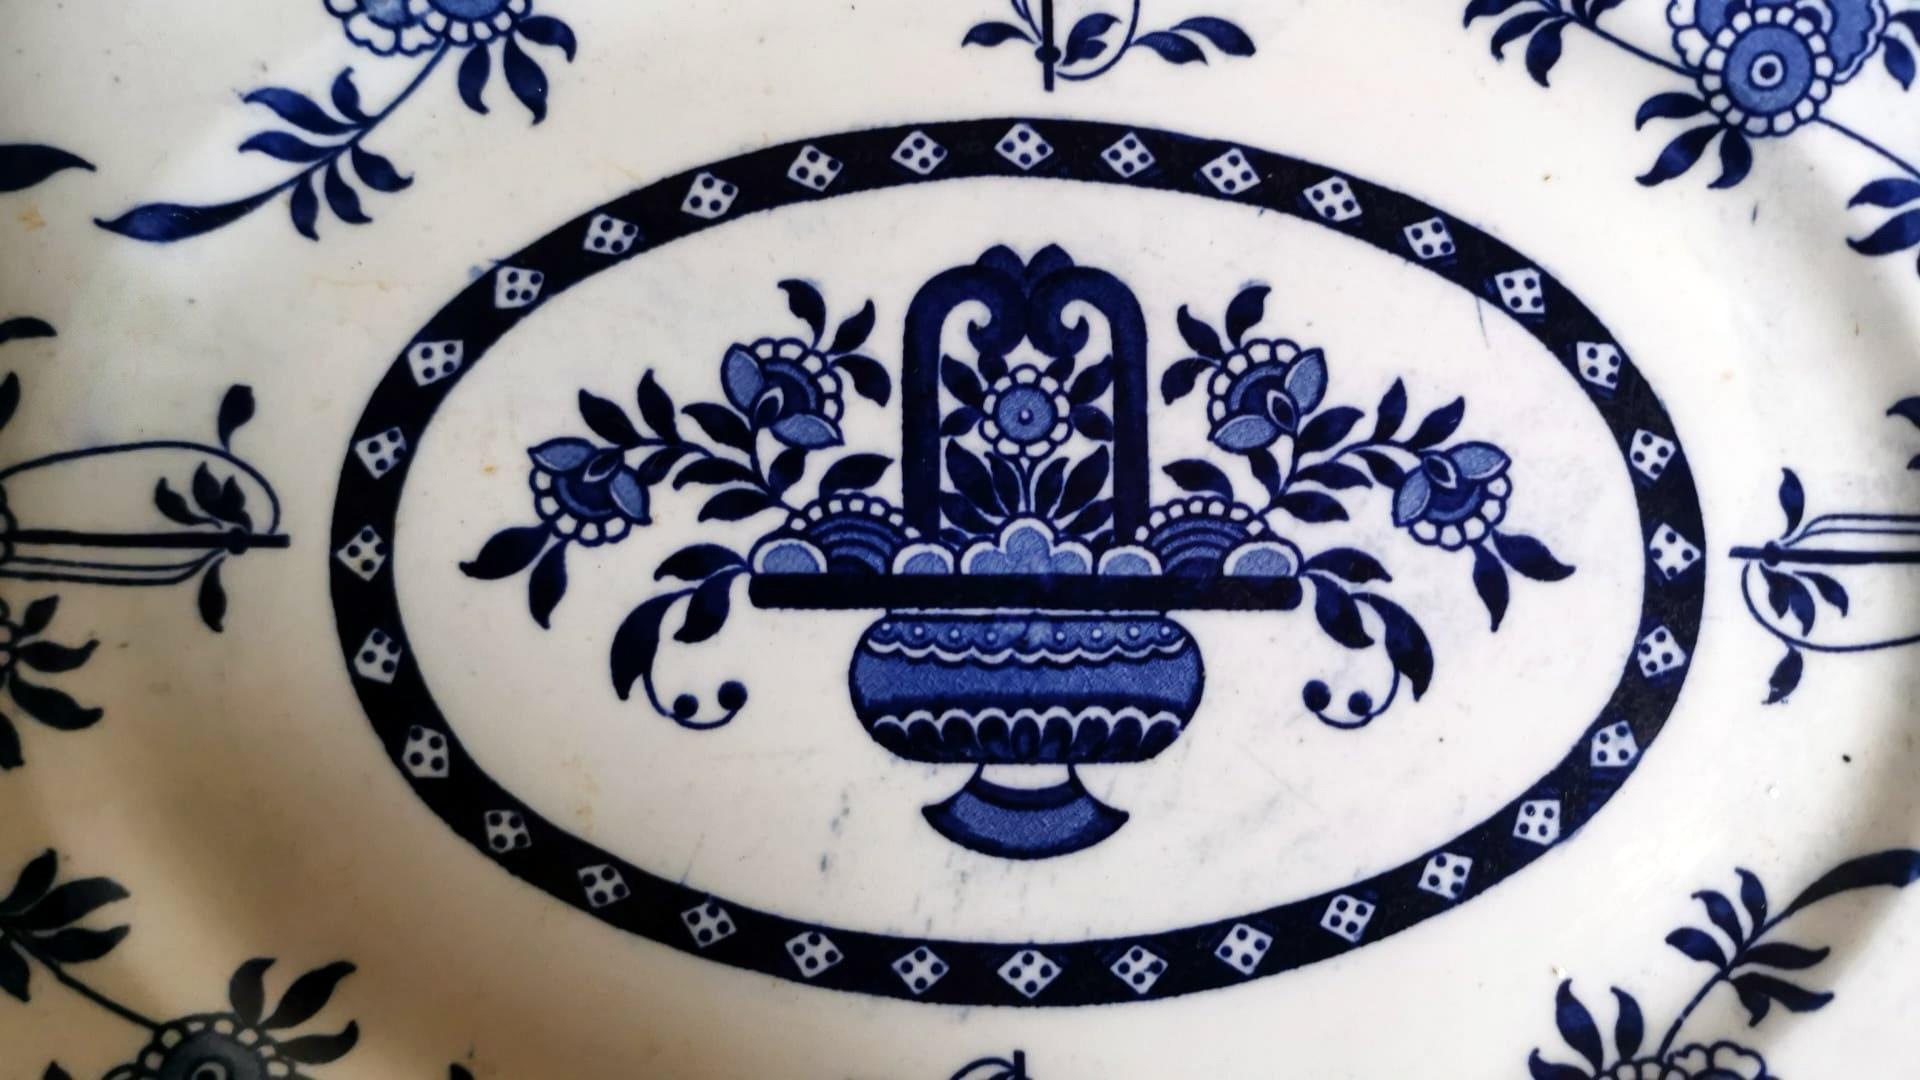 Glazed Staffordshire Potteries English Tray with Blue Transferware Decorations For Sale